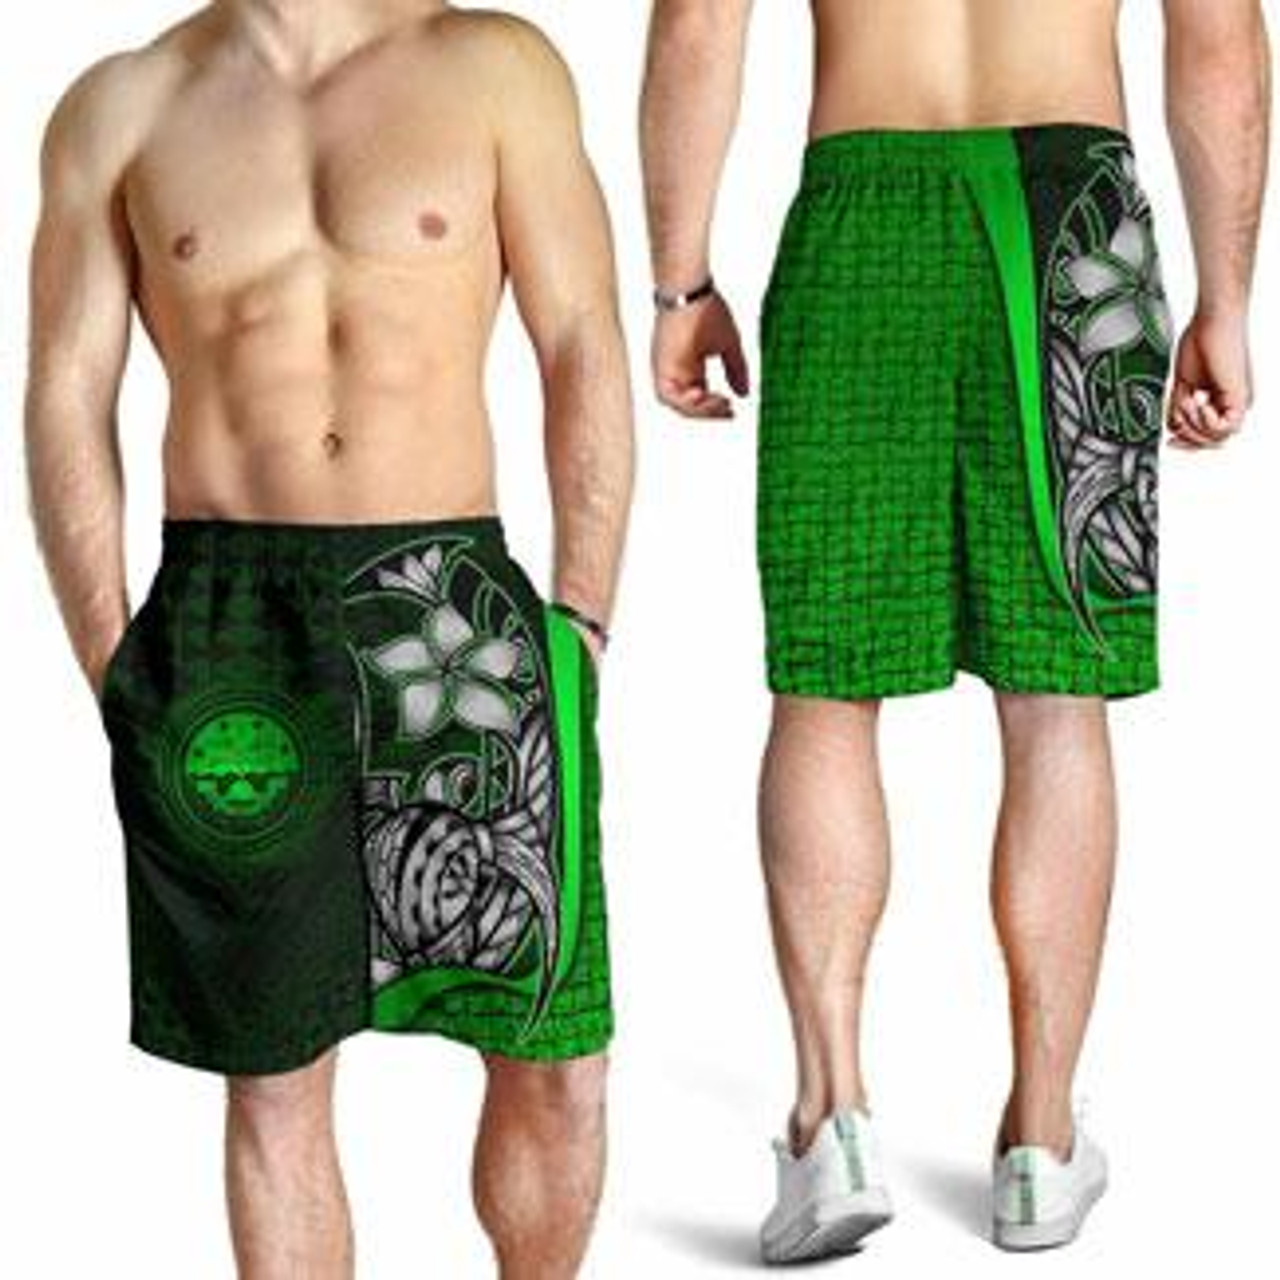 Federated States of Micronesia Men Shorts Green - Turtle With Hook 1